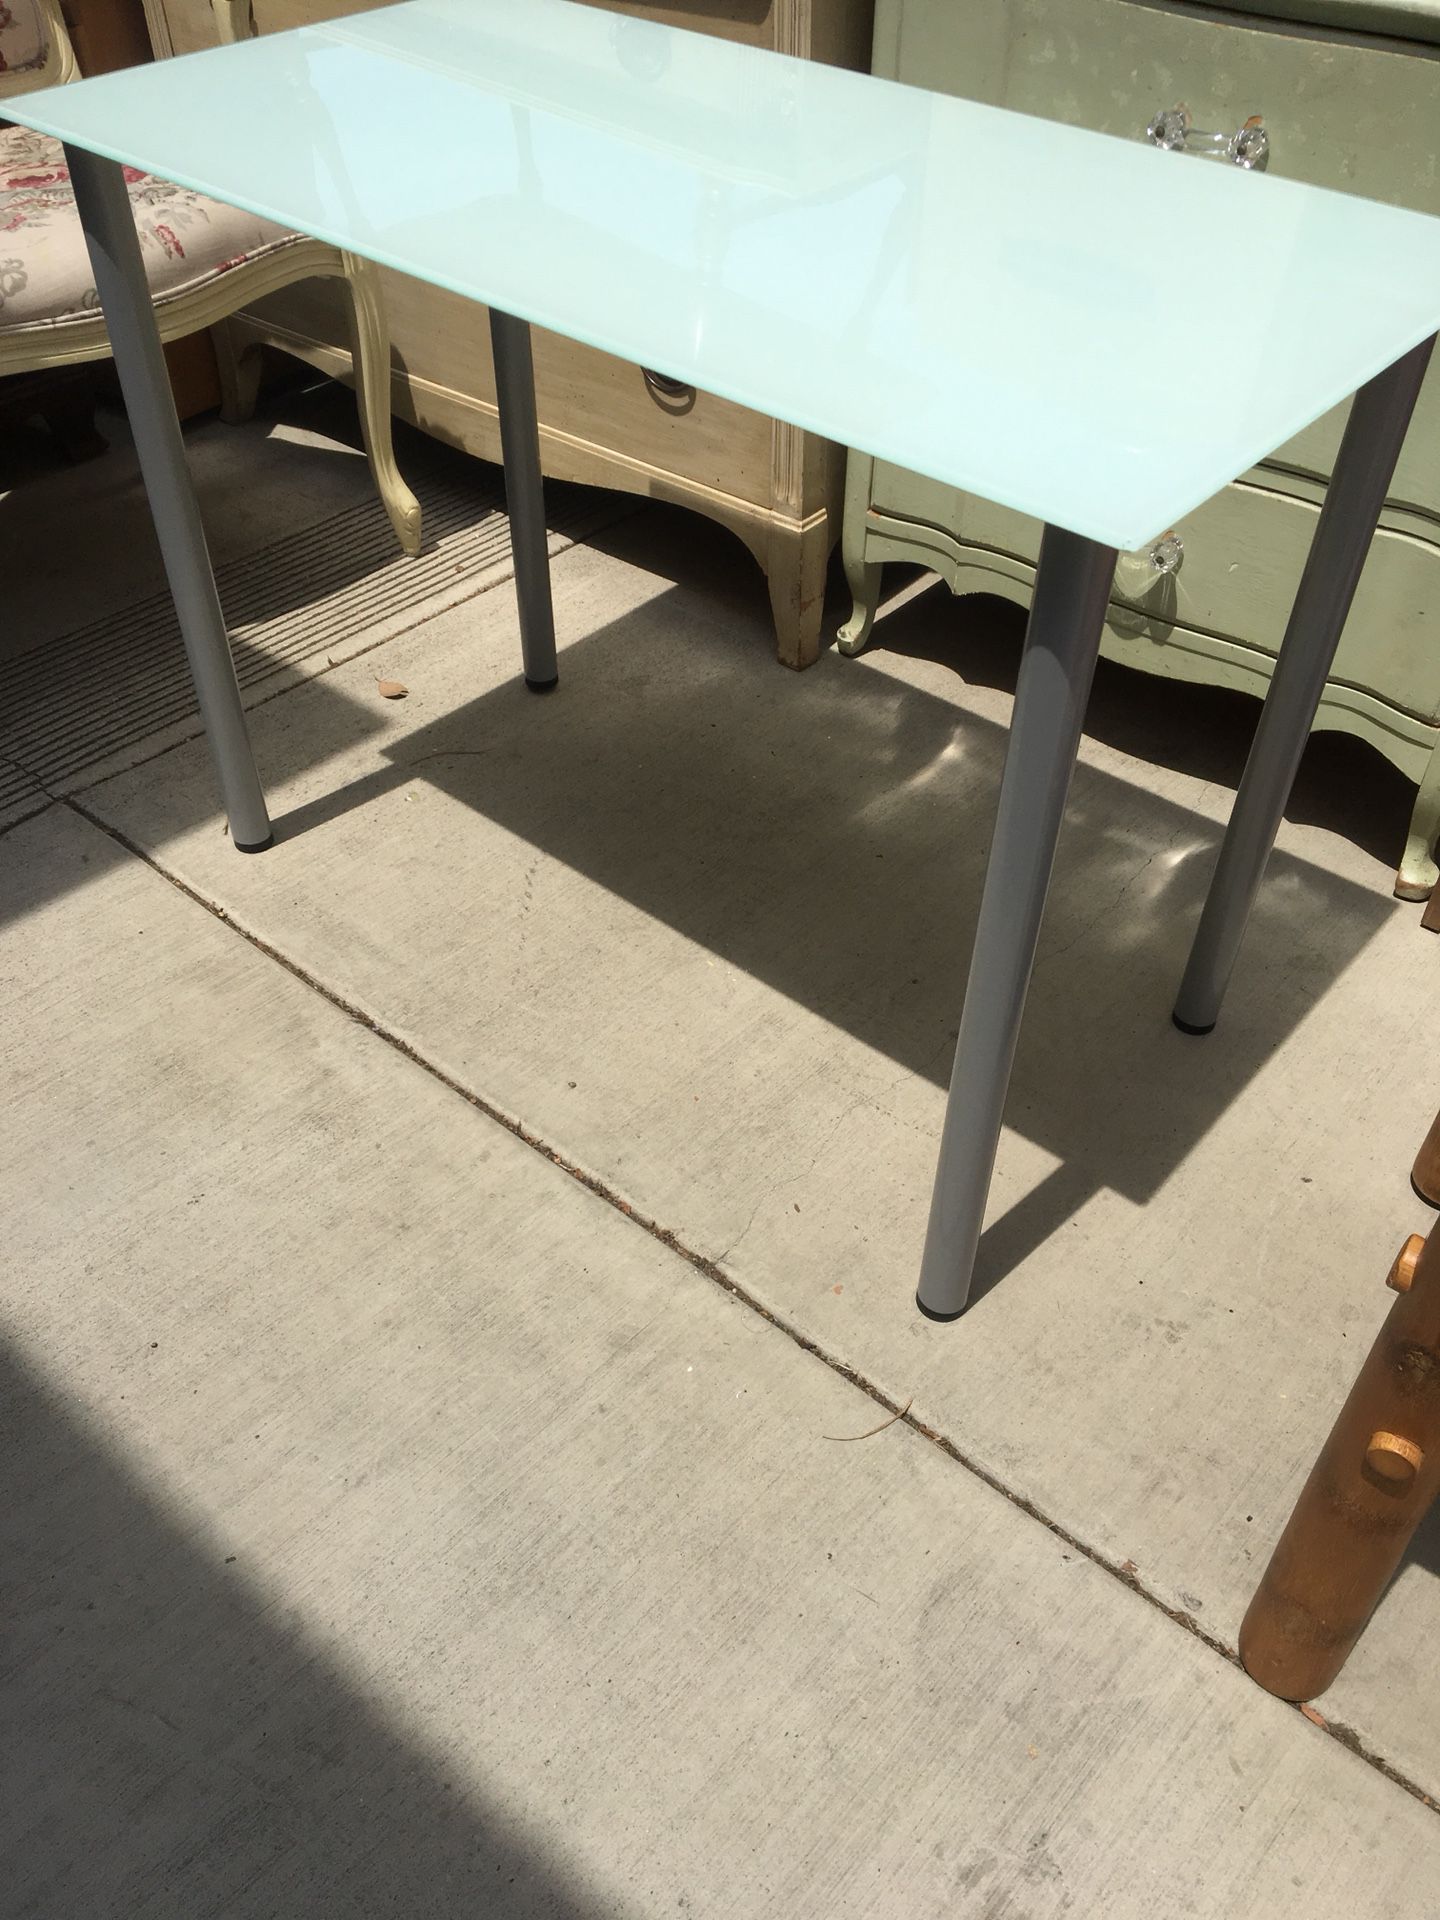 Glass top desk/table $40